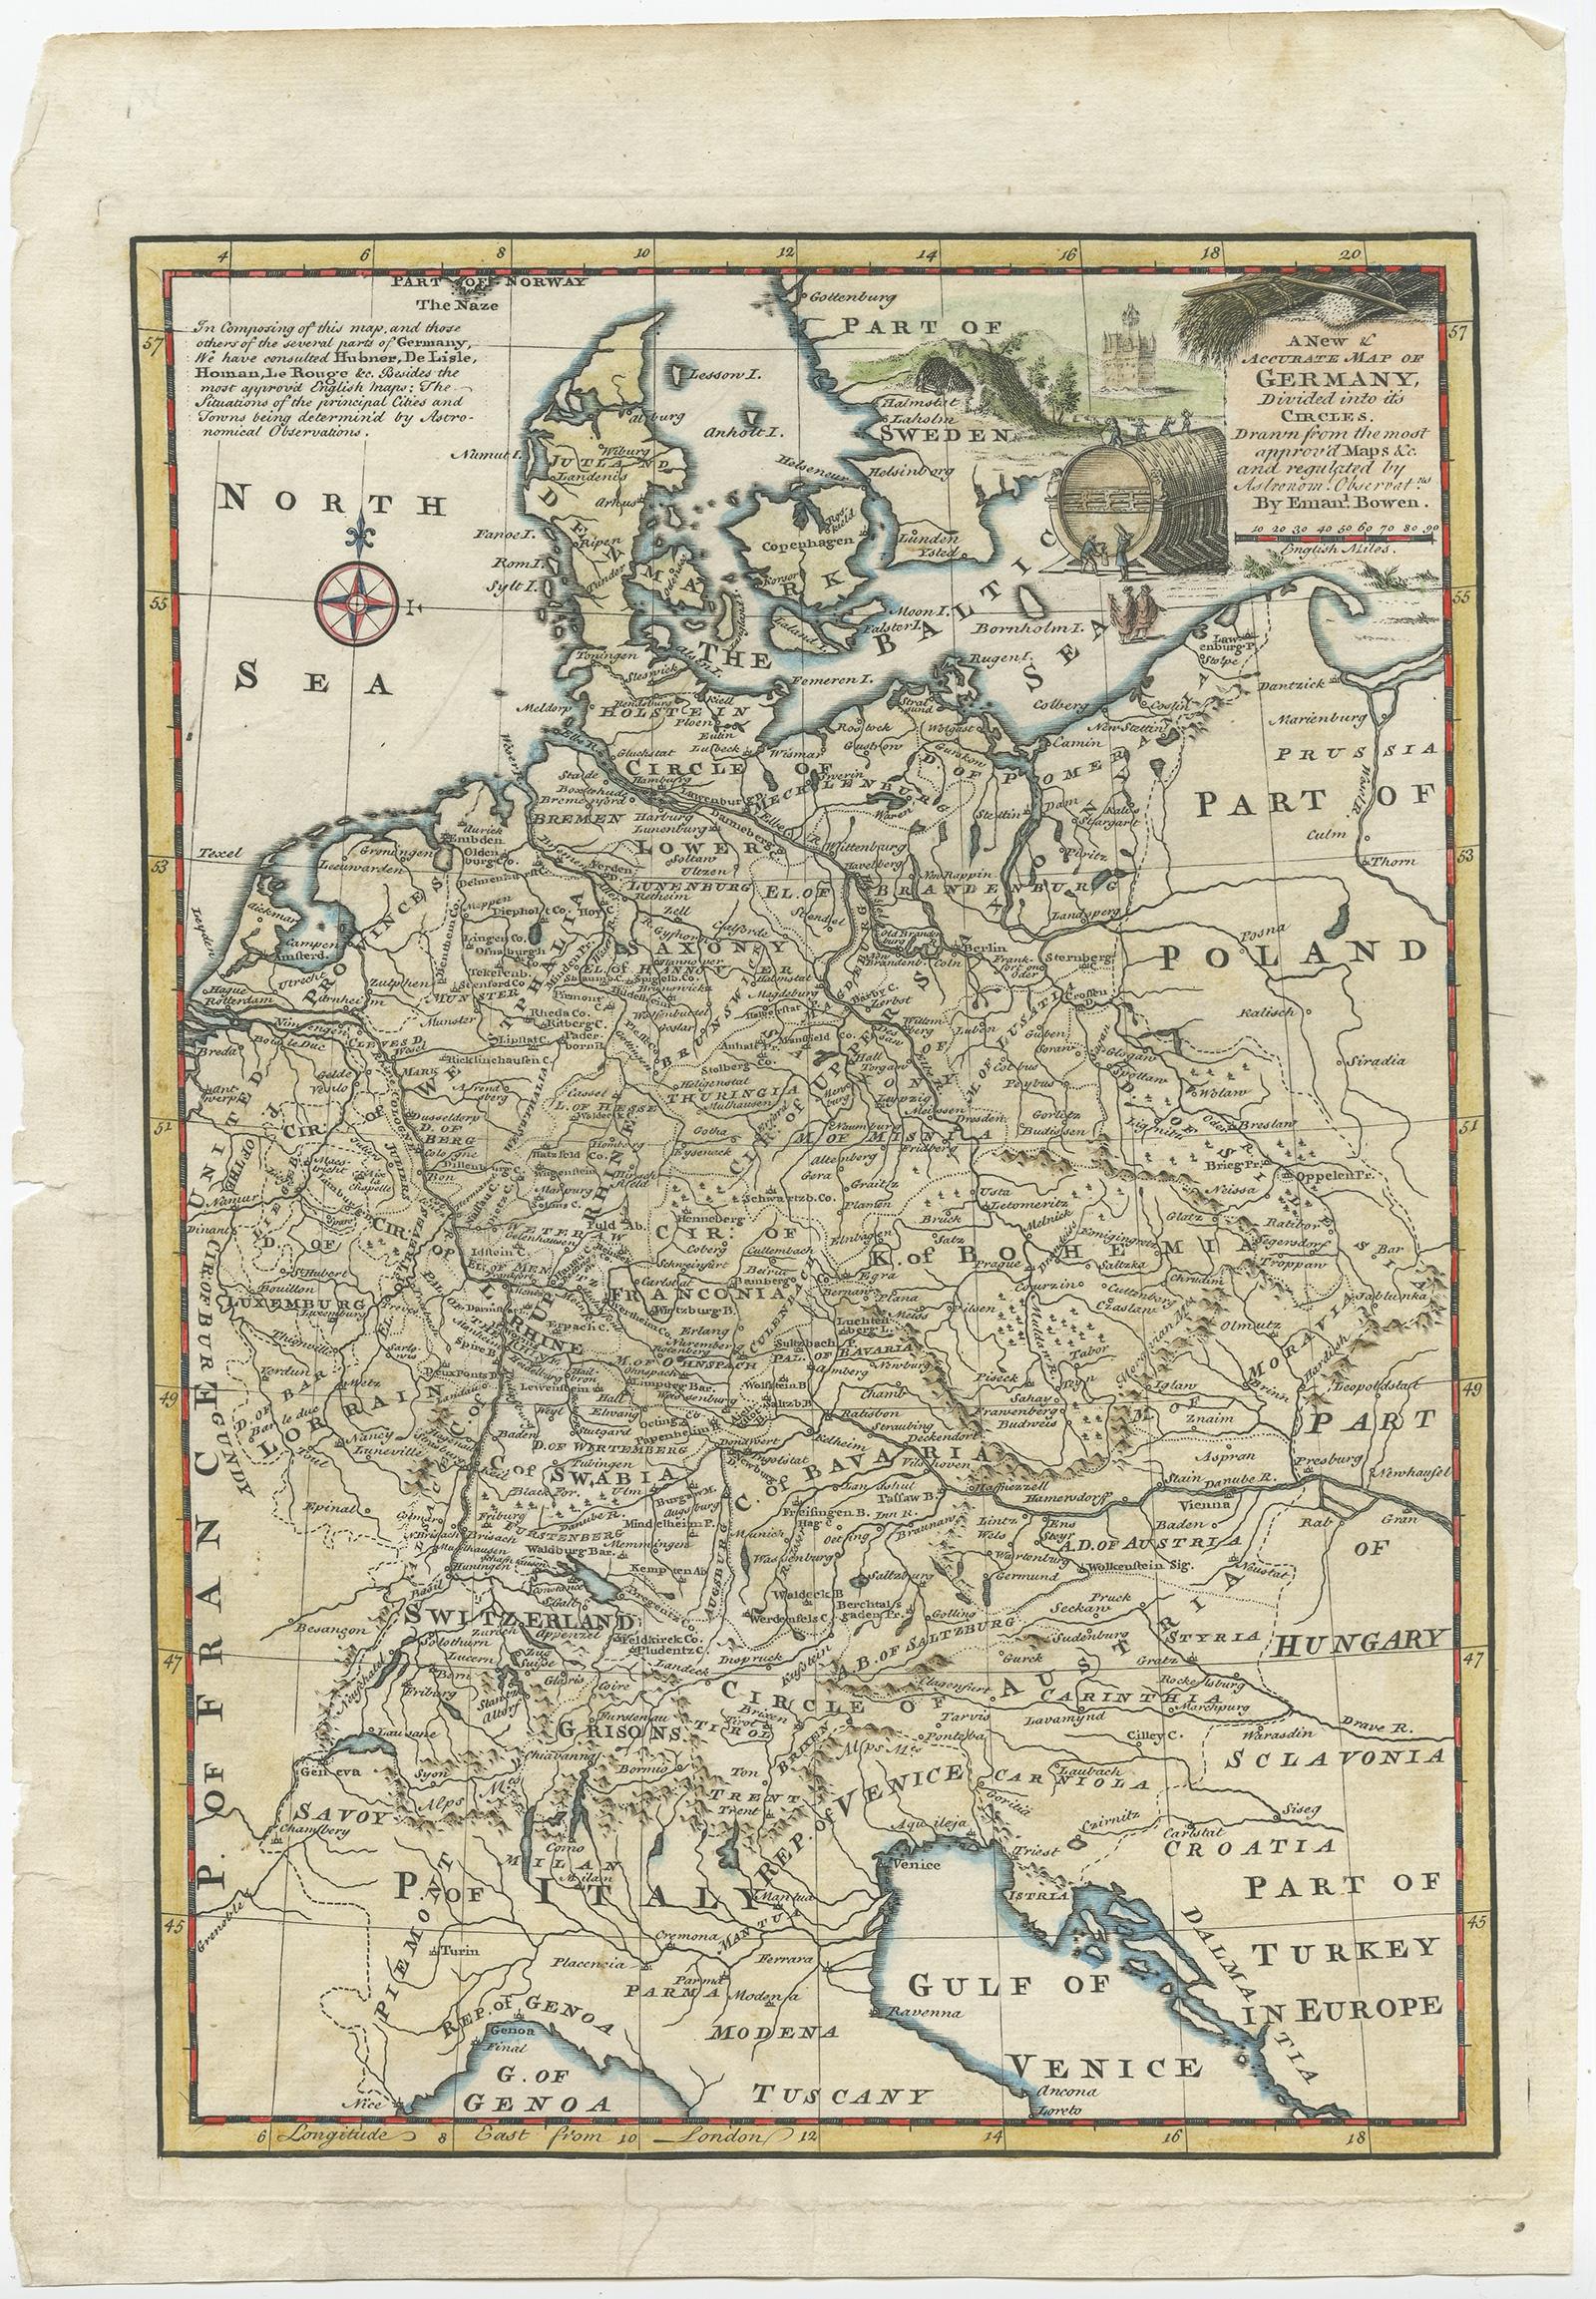 Antique map Germany titled 'A New & Accurate Map of Germany'. It covers Germany during the mid-18th century, which included all of modern day Germany, Austria, Switzerland, Czech Republic, the Netherlands, Denmark and parts of Eastern Europe. Parts